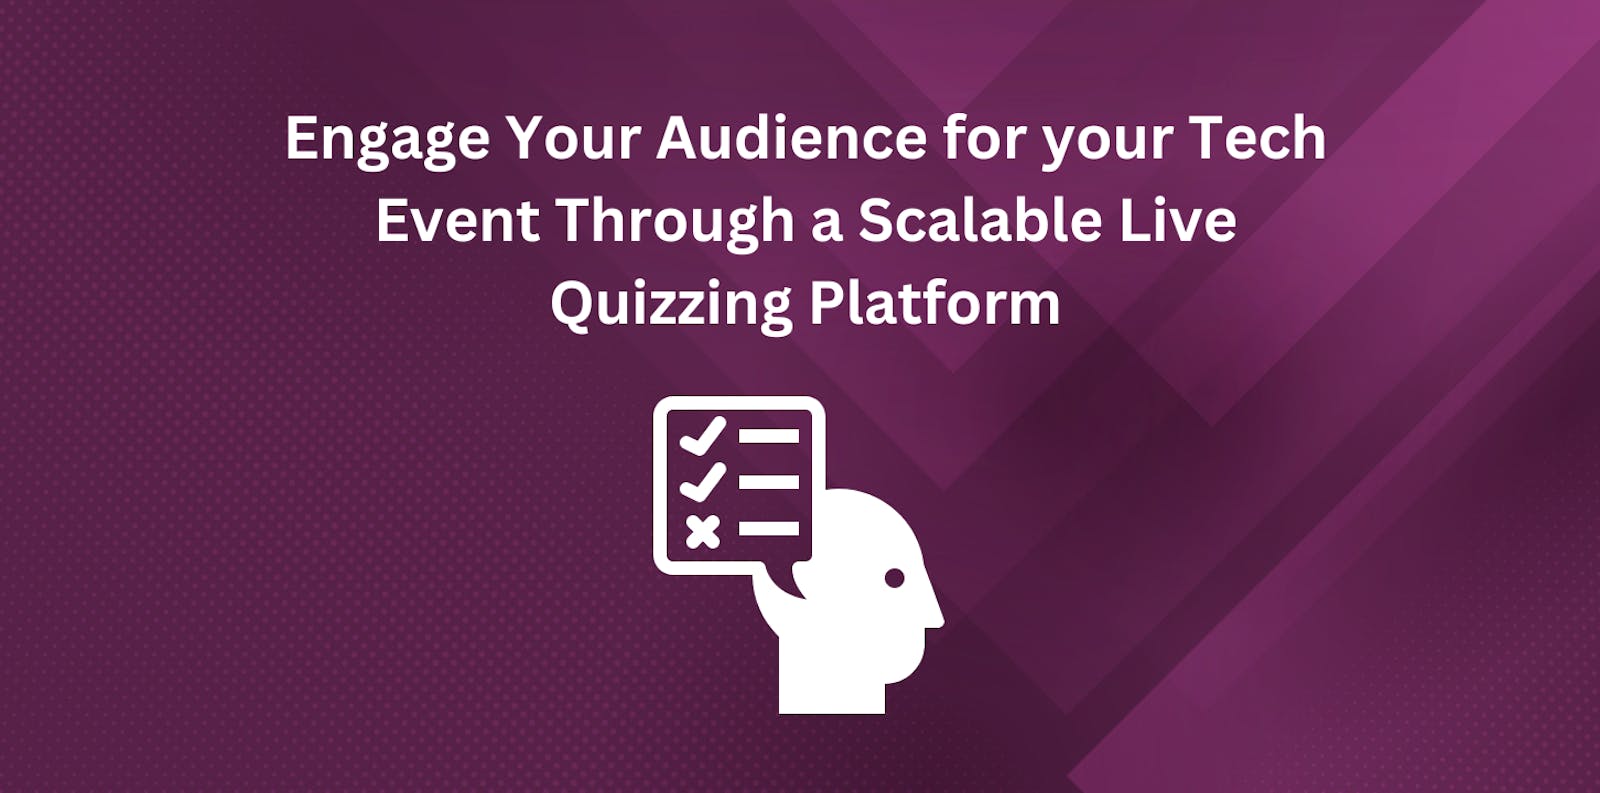 Engage your audience for your tech event through a scalable live quizzing platform